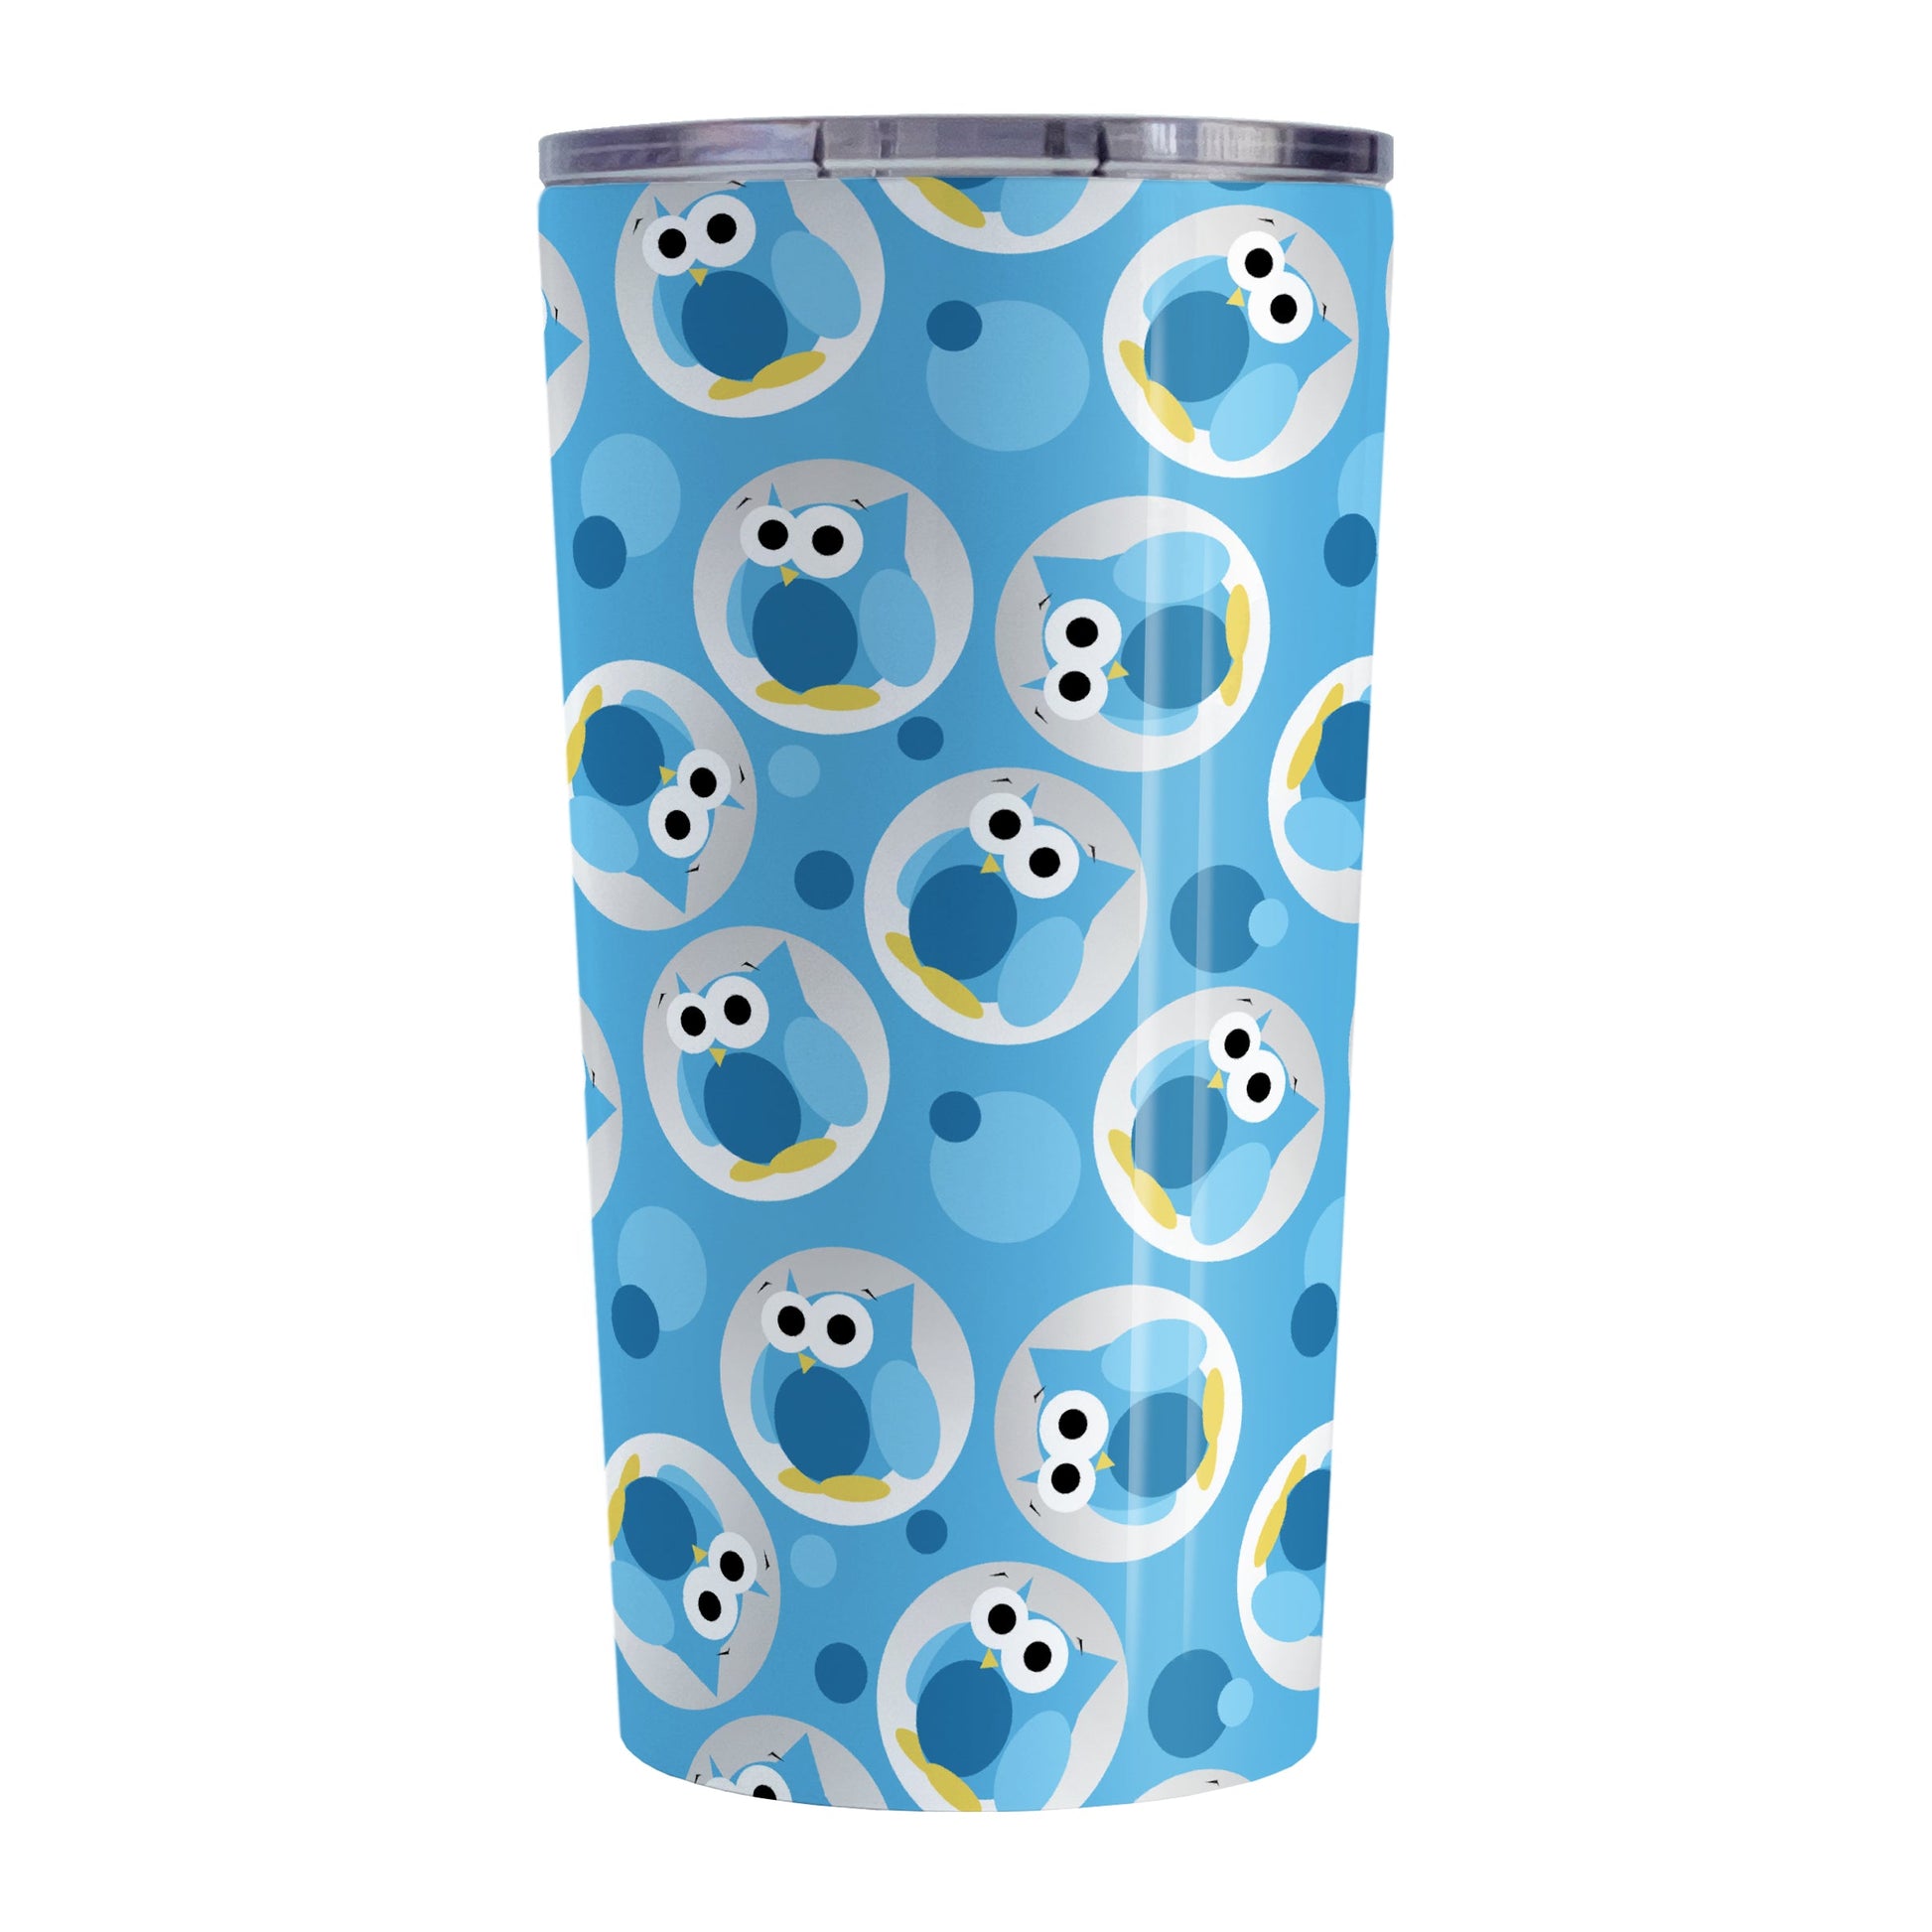 Funny Cute Blue Owl Pattern Tumbler Cup (20oz, stainless steel insulated) at Amy's Coffee Mugs